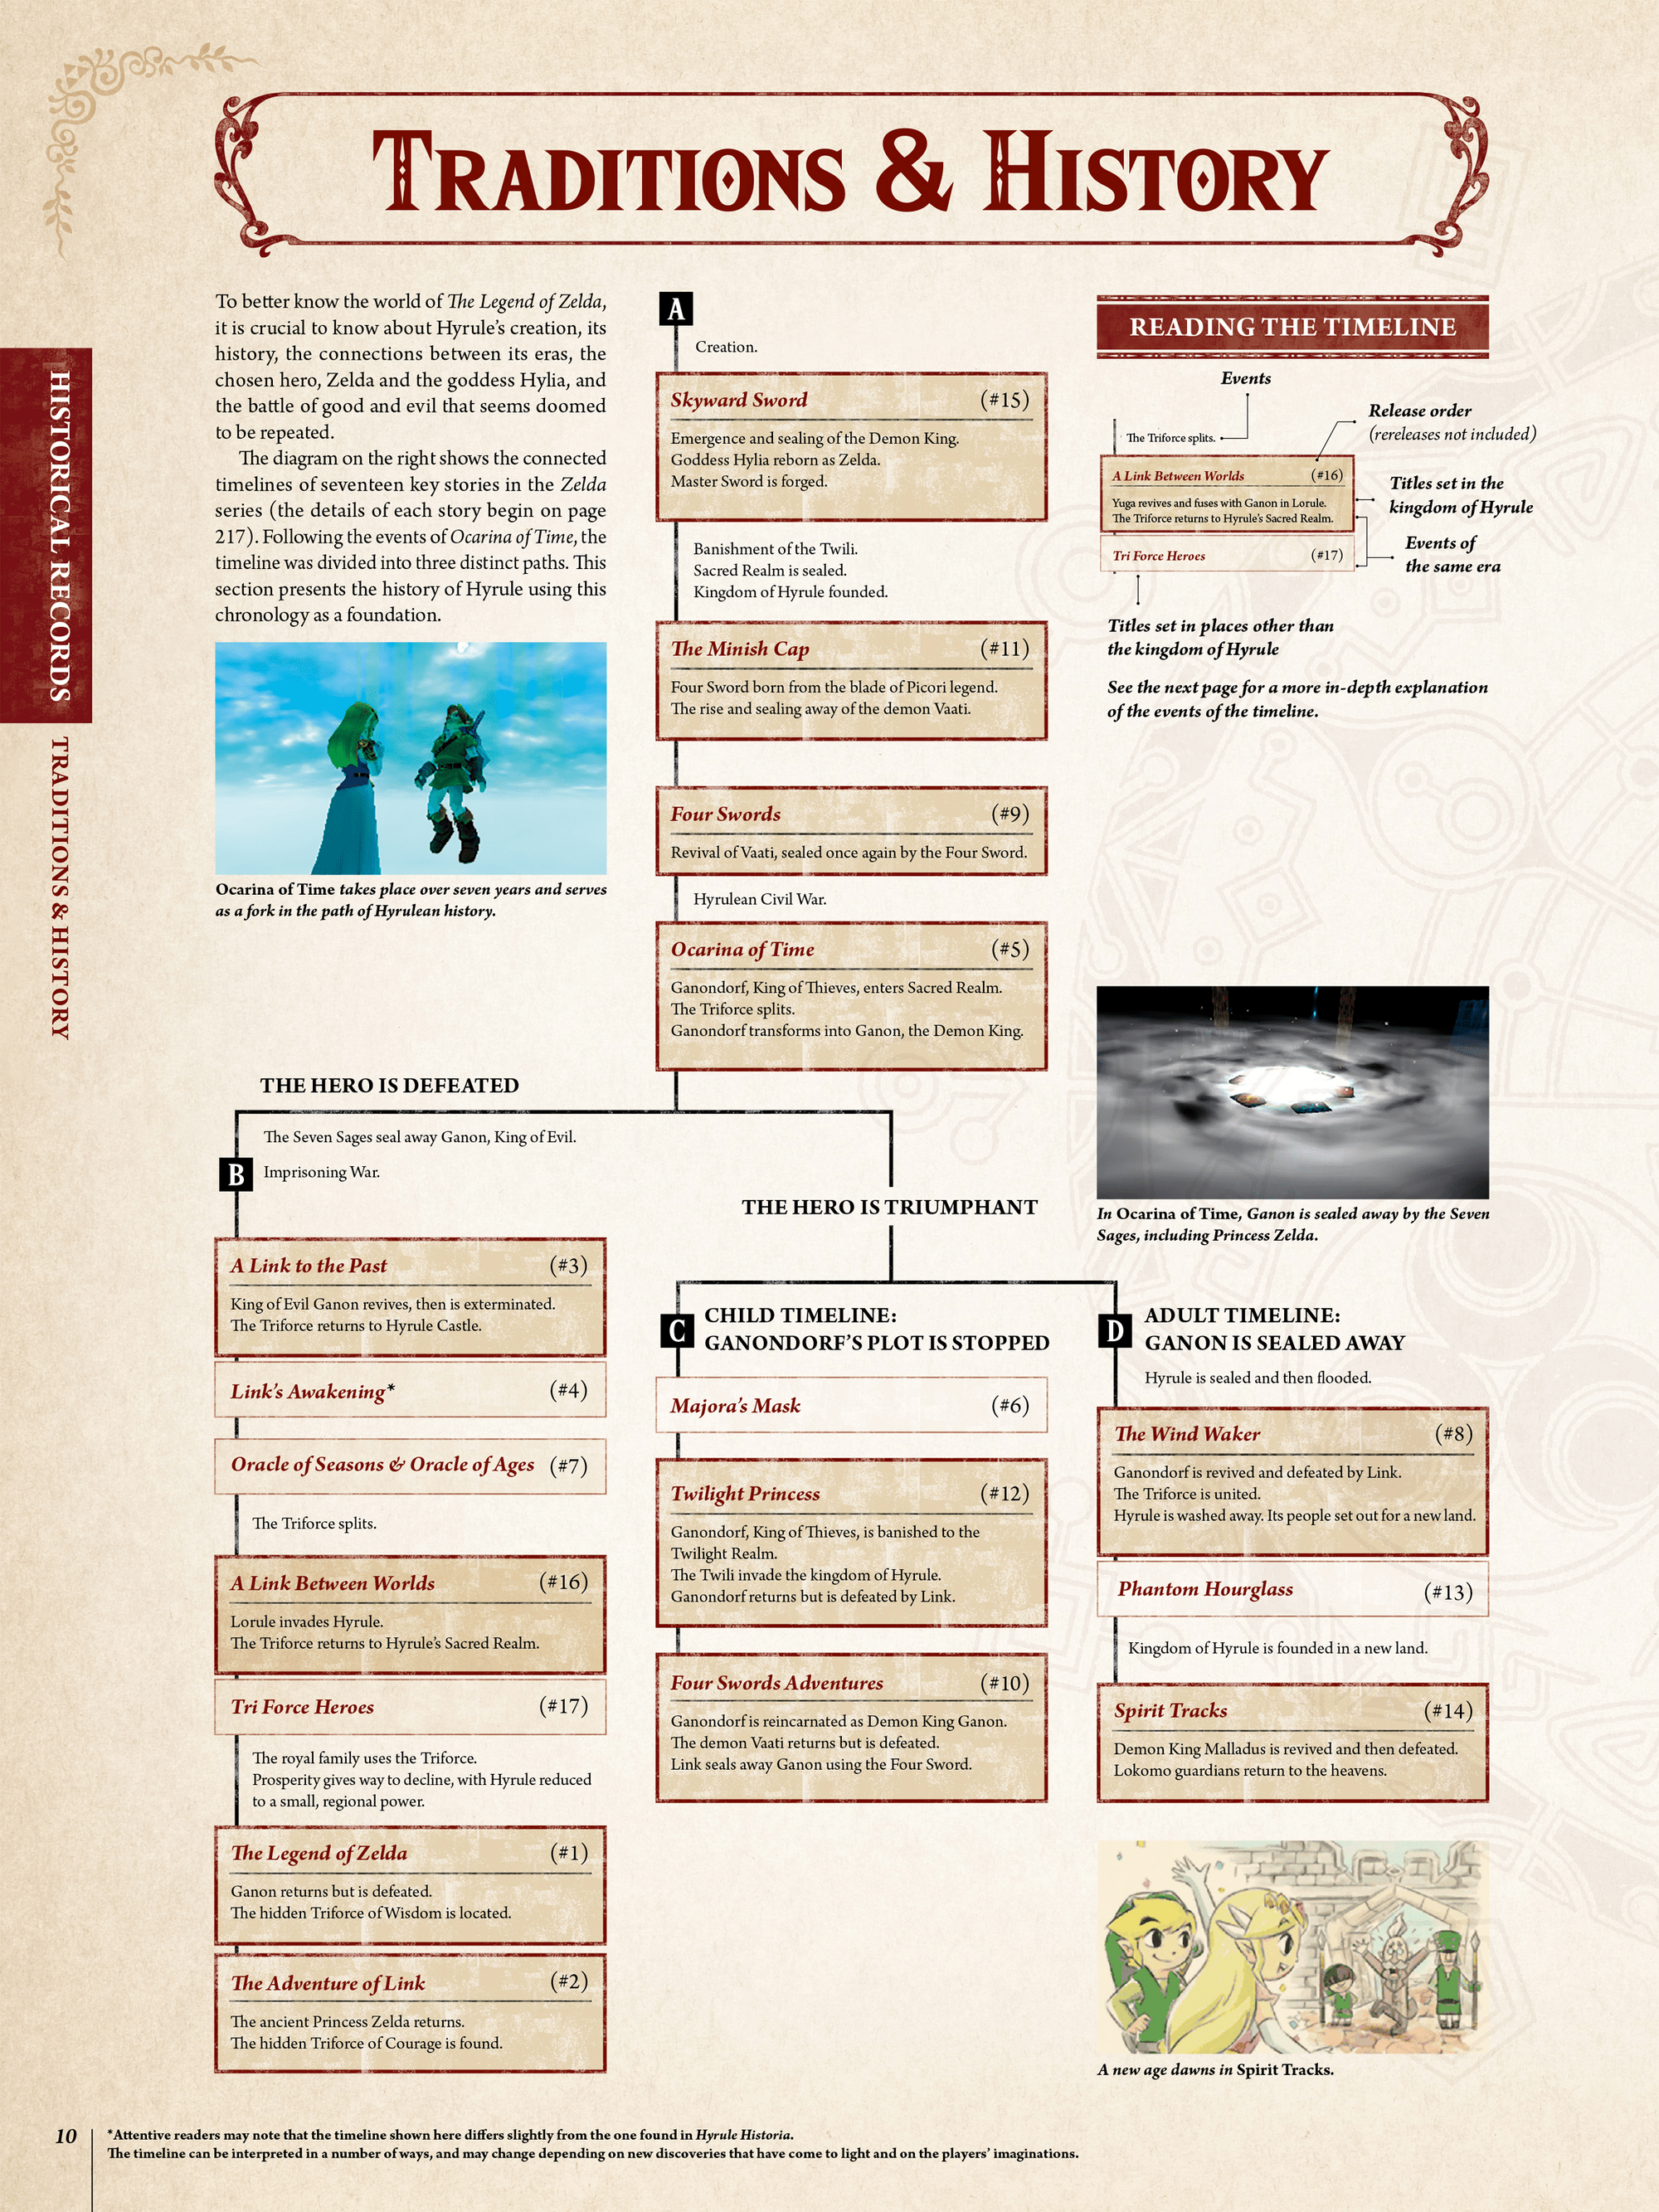 Timeline young earth creationism